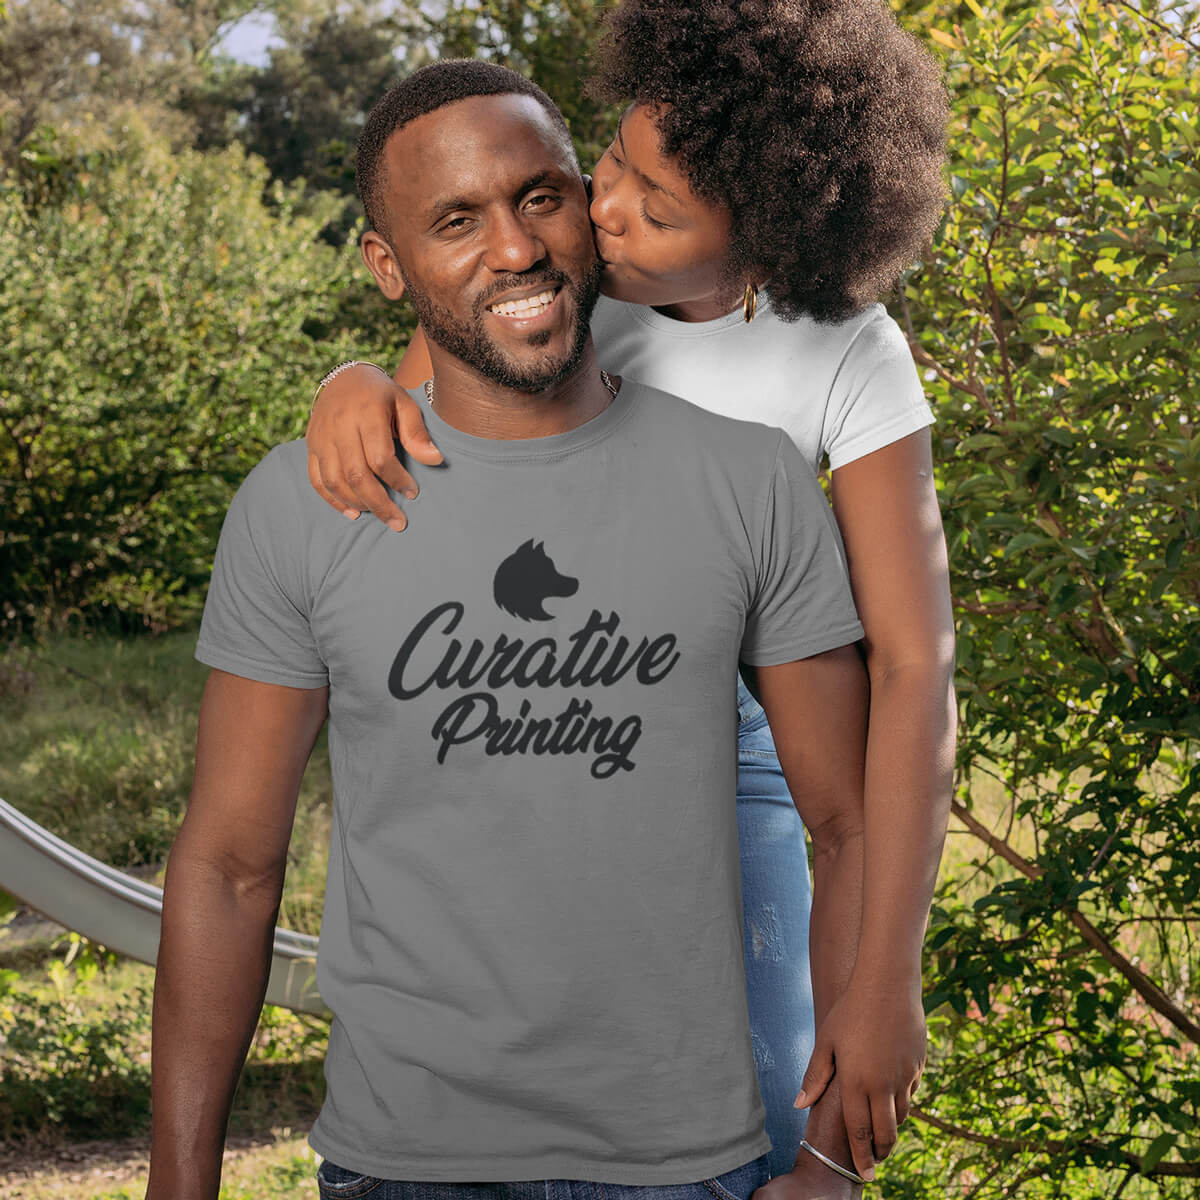 Woman stands behind man and kisses him on the cheek as he wears grey short sleeve t-shirt tee with black curative printing logo imprint